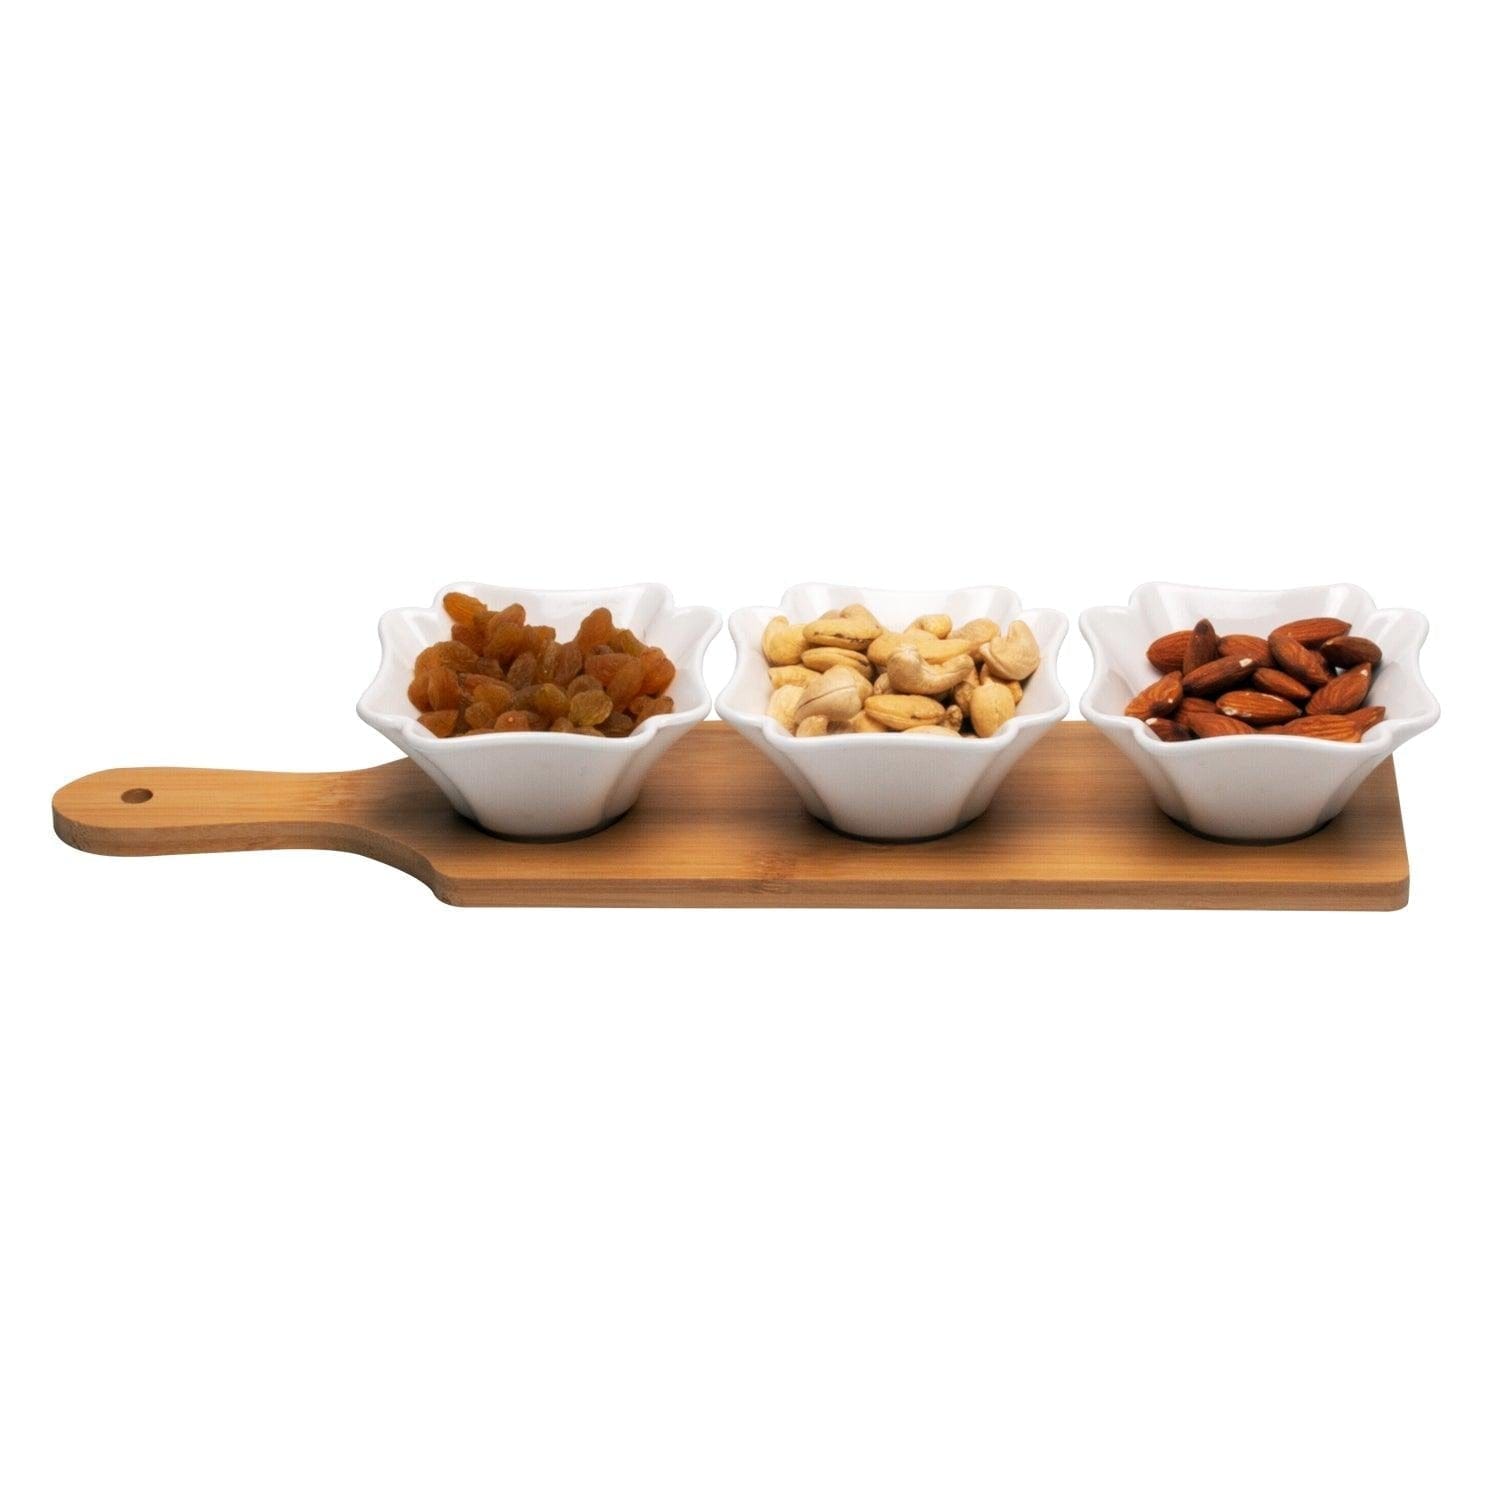 3 Square Shaped Ceramic Bowls Serving Platter with Wooden Tray Set